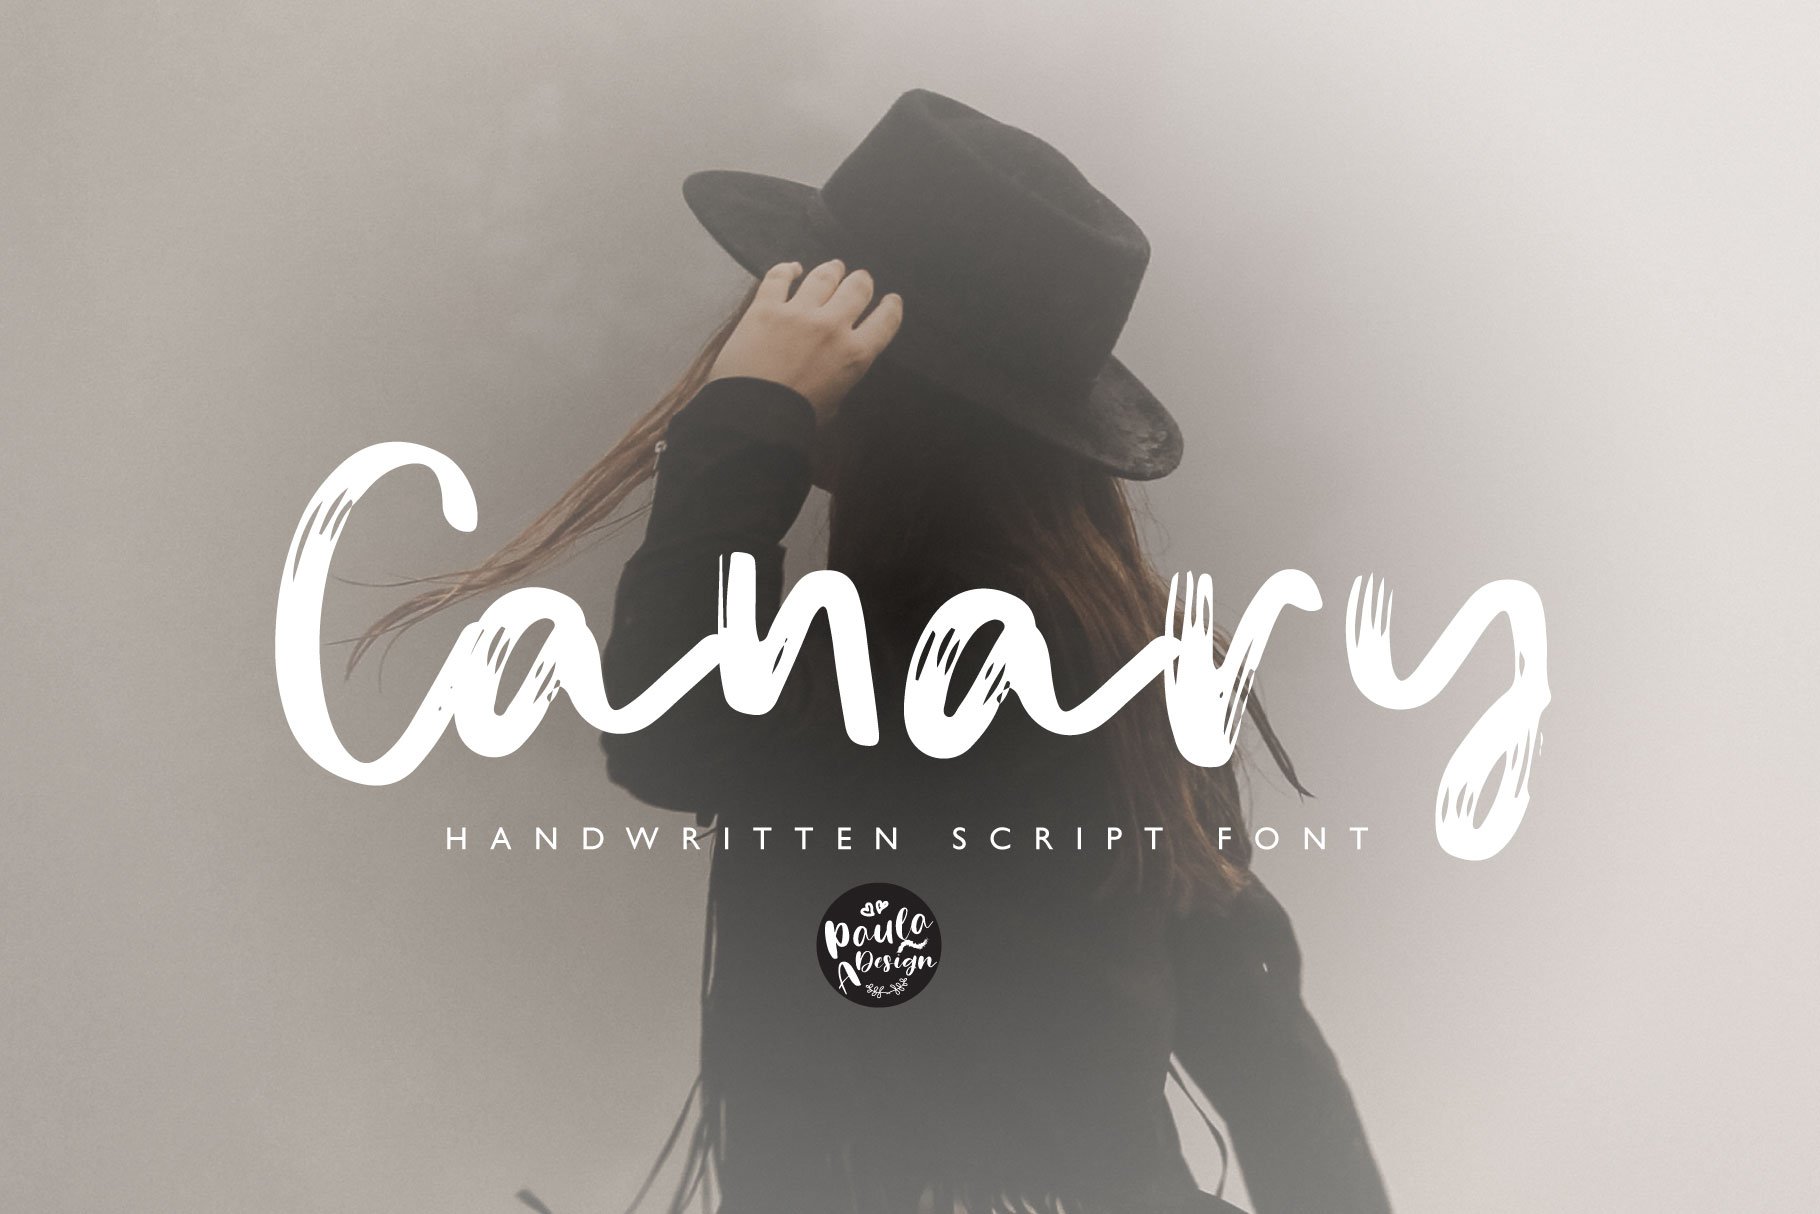 Canary | Handwritten Font cover image.